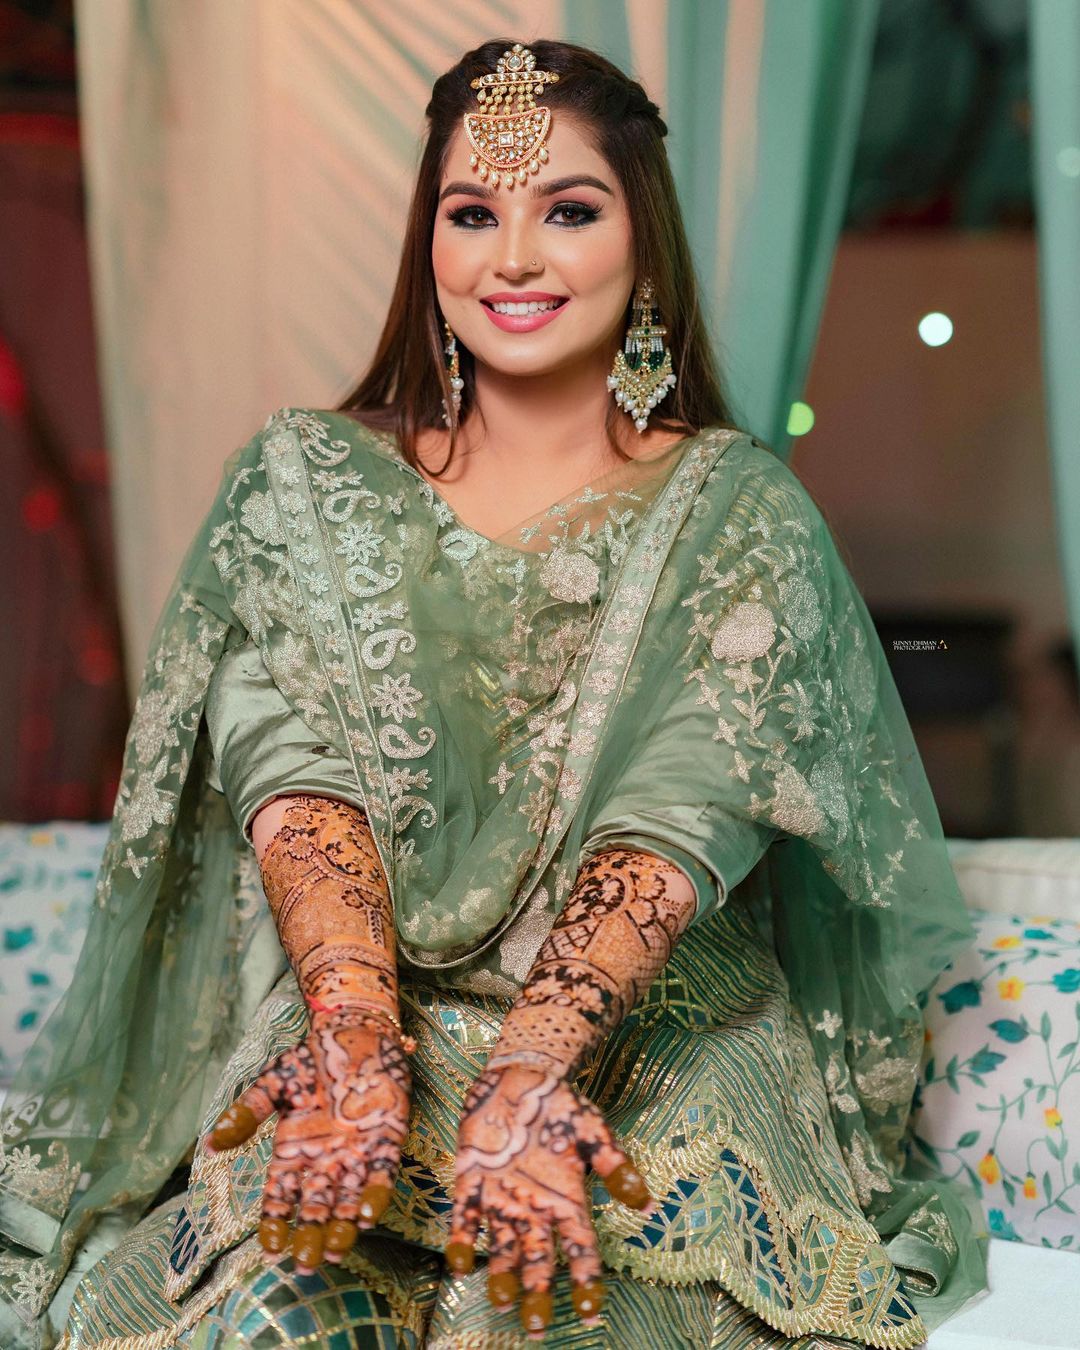 Captivating Nepali Bride with Mehendi-covered Hand and a Serious Gaze -  Photos Nepal